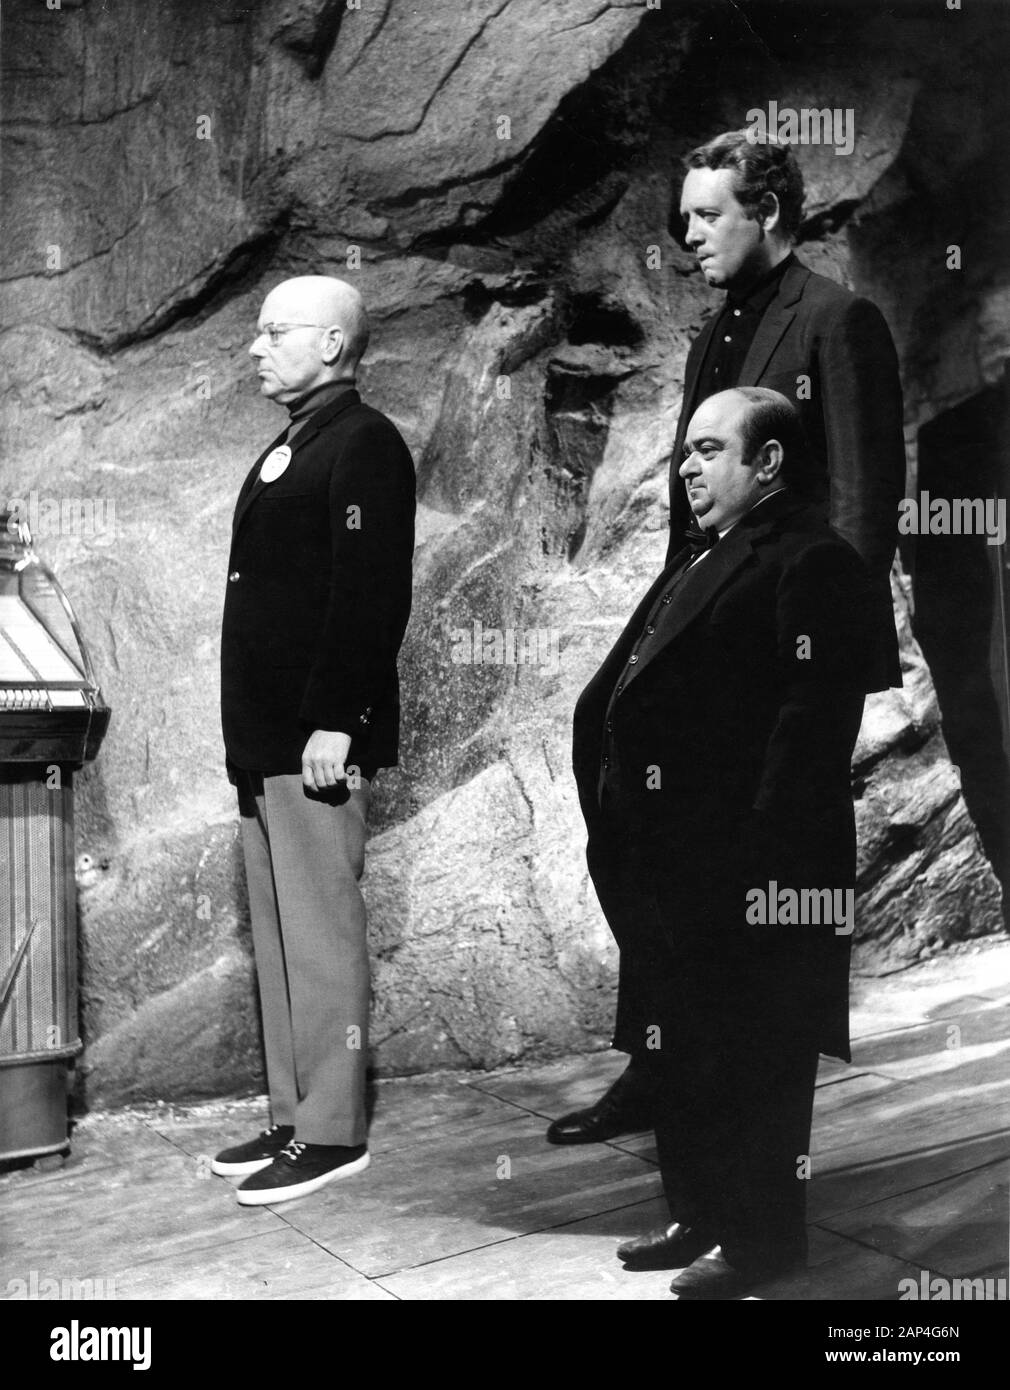 PETER SWANICK as The Supervisor ANGELO MUSCAT as The Butler and PATRICK McGOOHAN as No. 6 in THE PRISONER 1967 Episode : FALL OUT director Patrick McGoohan creator Patrick McGoohan Everyman Films / Incorporated Television Company (ITC) / ITV - Independent Television Stock Photo